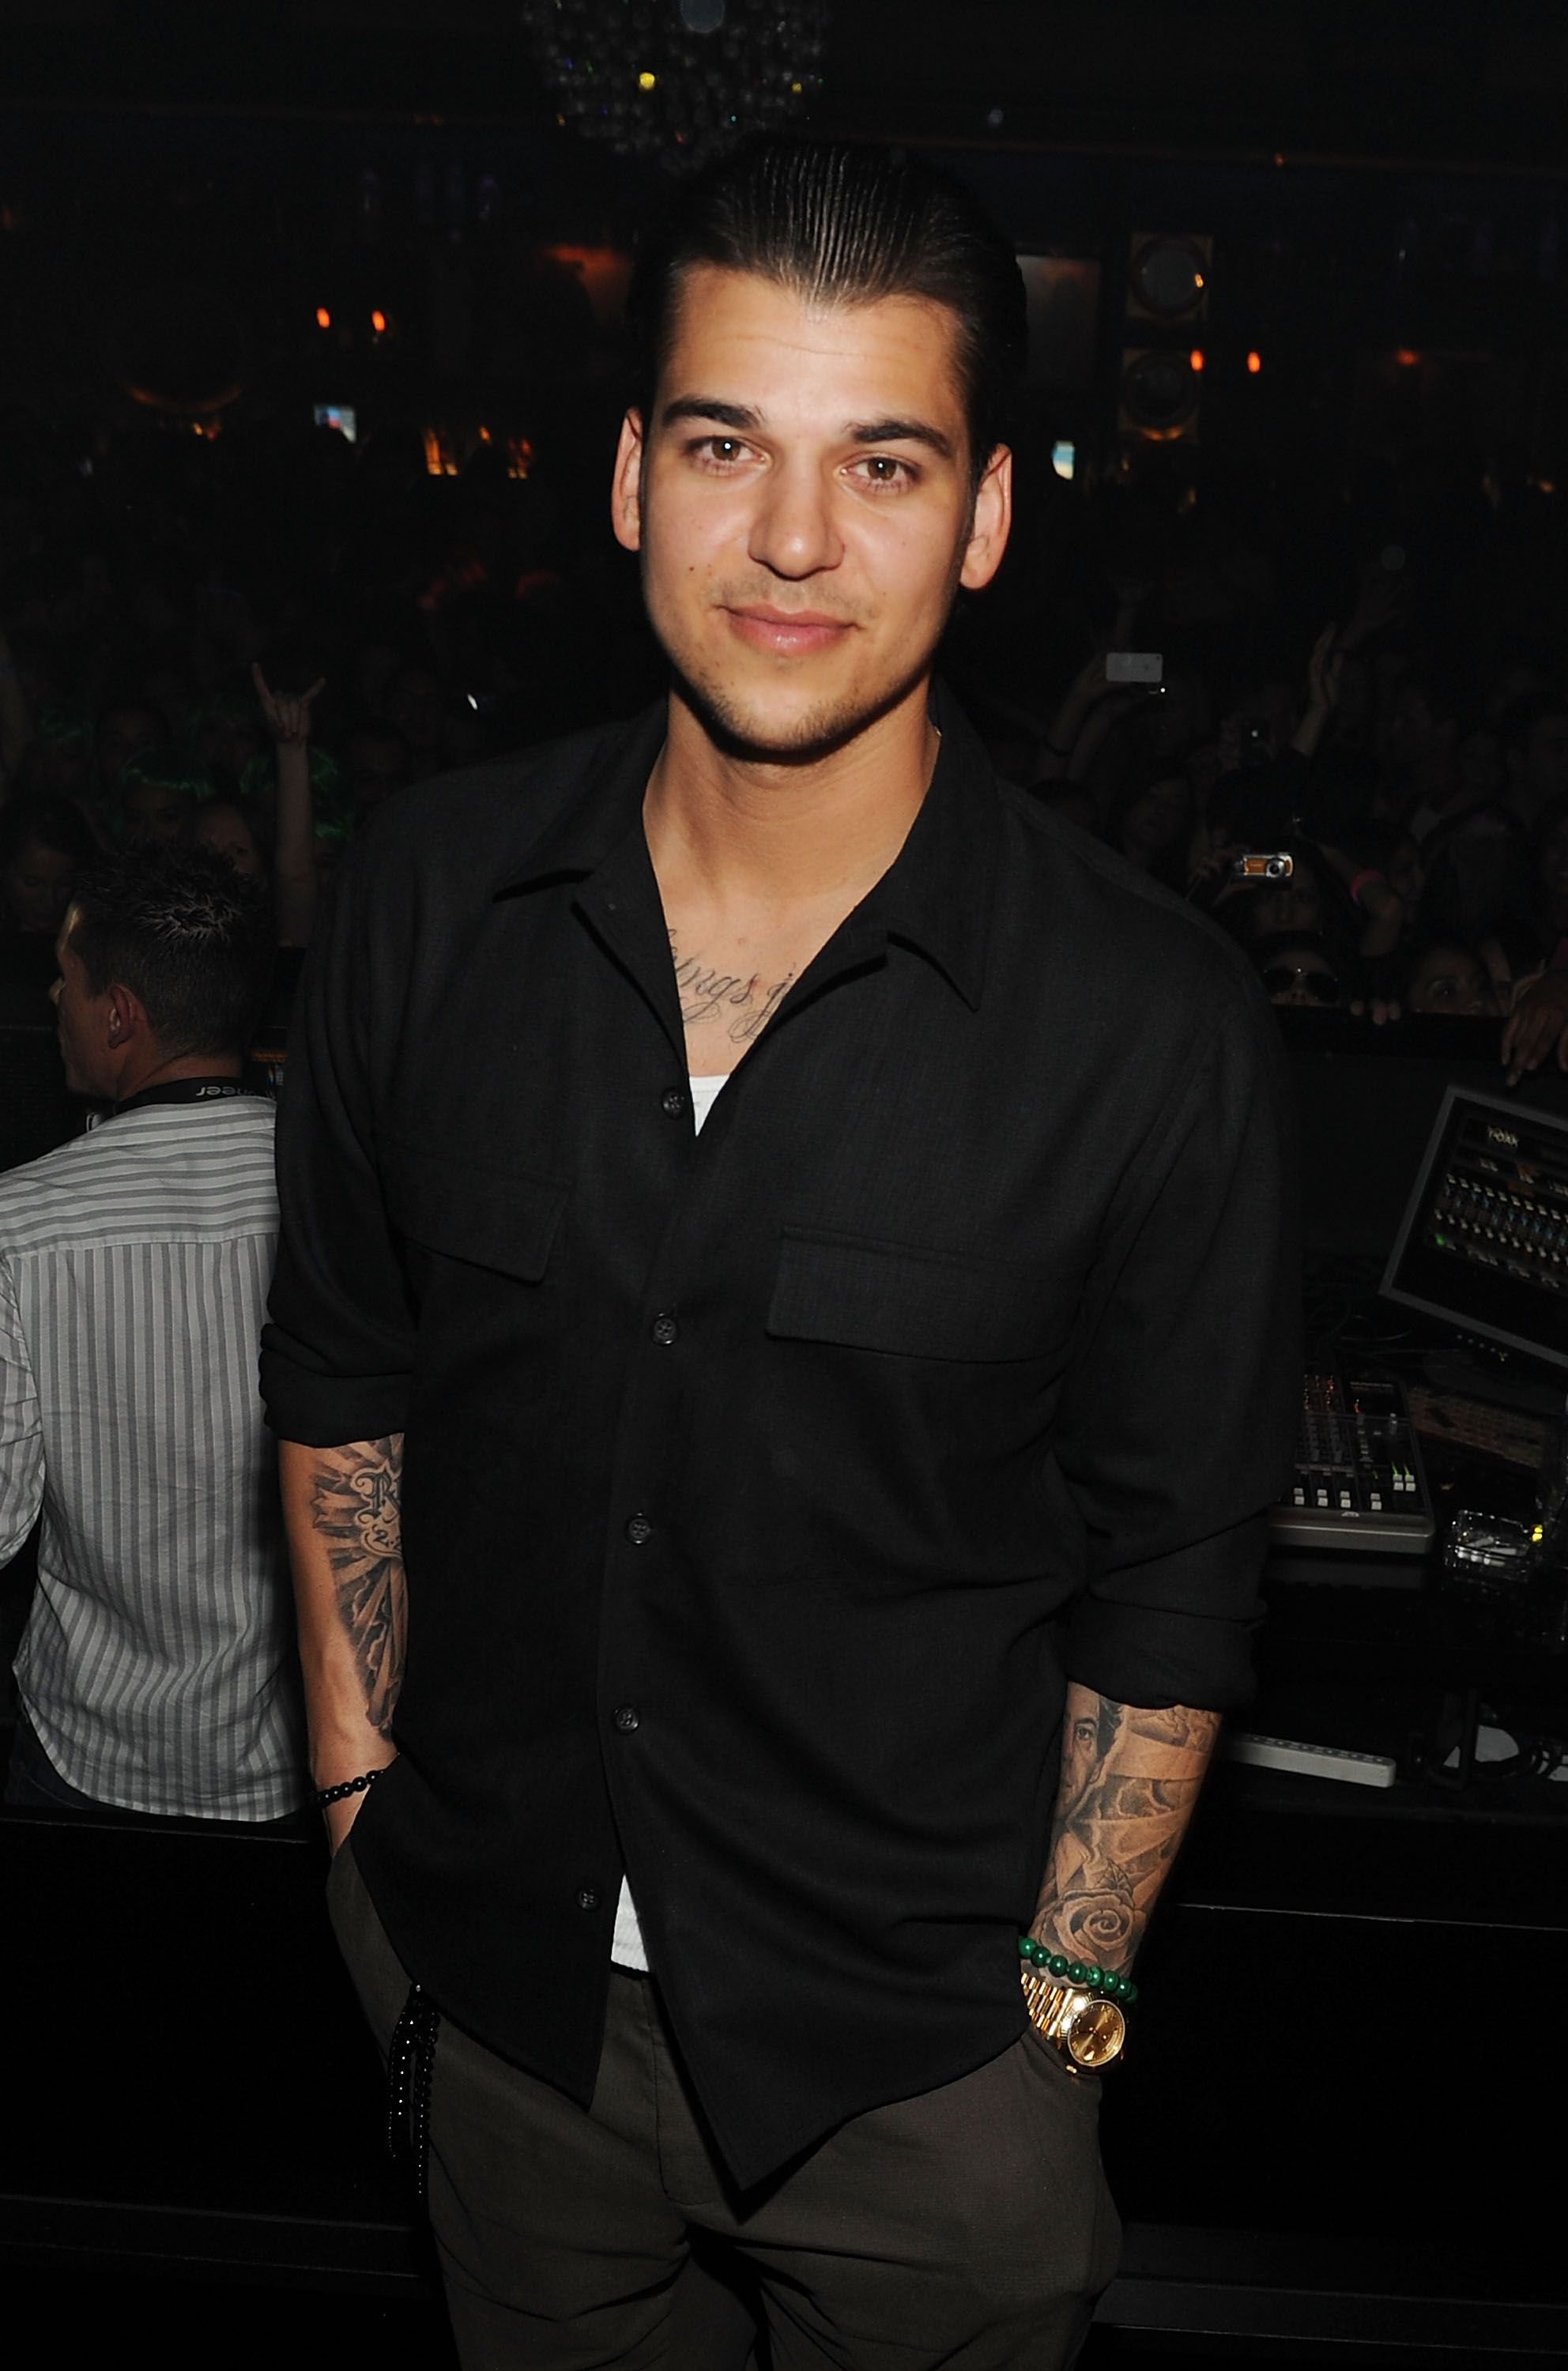 Rob Kardashian Celebrates his birthday at 1 Oak on March 16, 2012 in Las Vegas, Nevada. | Source: Getty Images